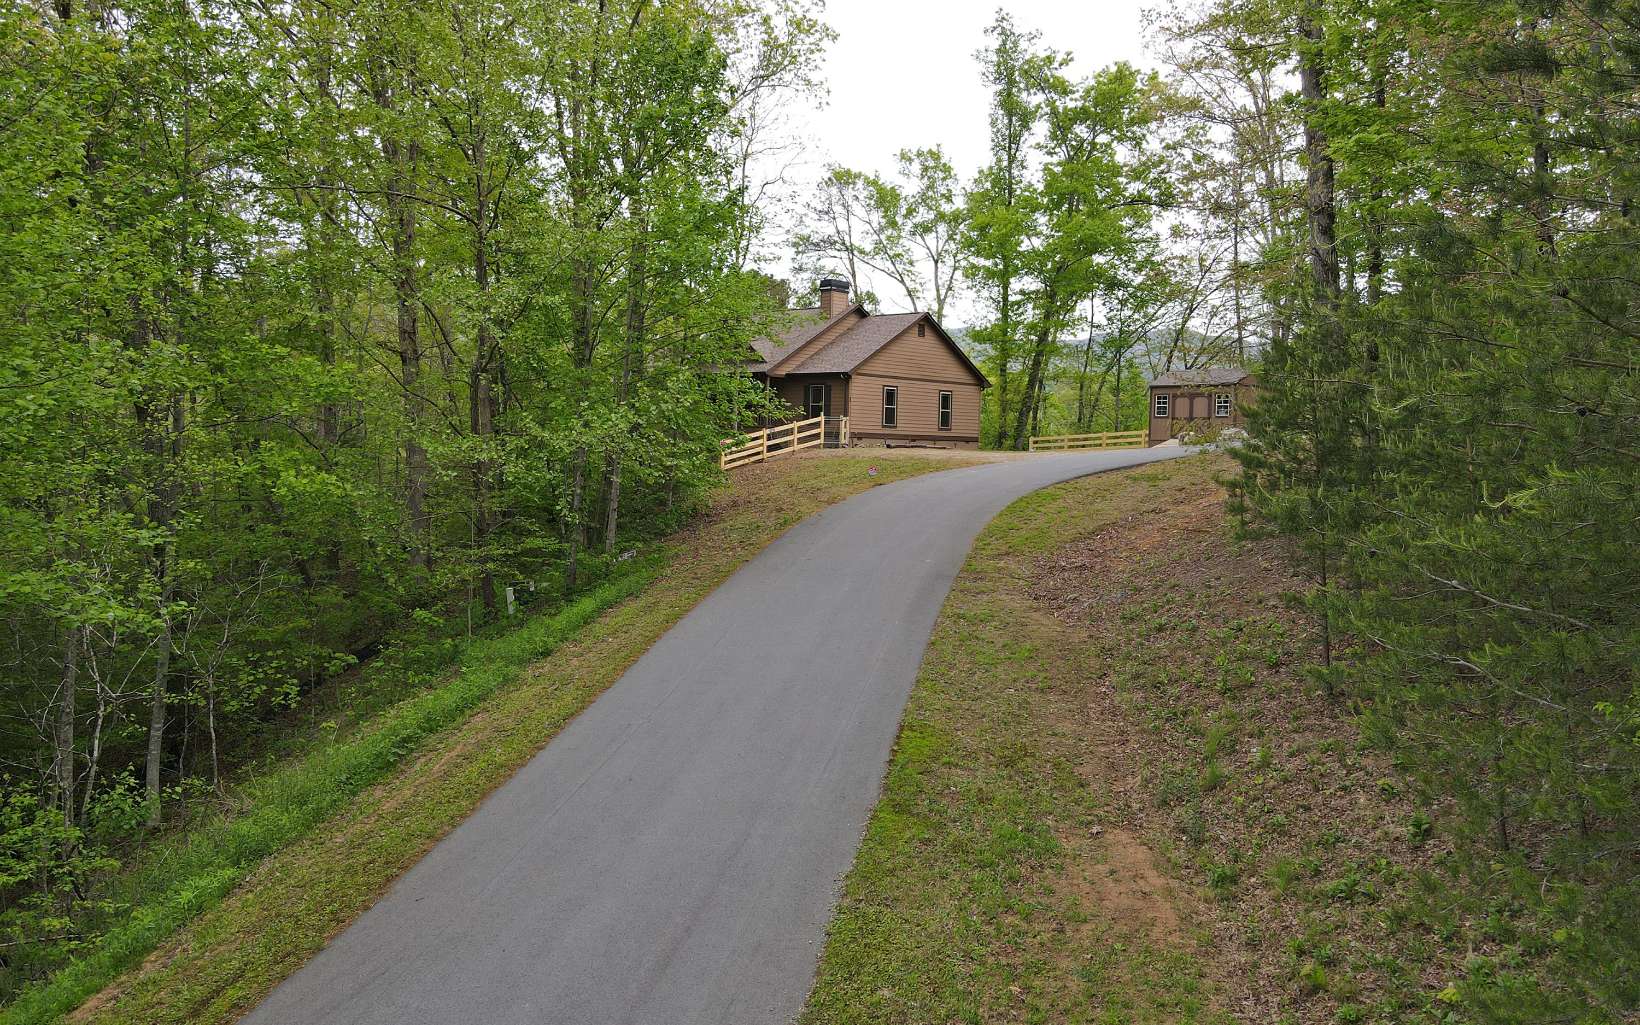 Are you looking for a cabin in the mountains with a VRBO history? Or are you looking for a second home to relax and enjoy the peace and tranquility of the Northeast Georgia mountains? This home has it all! It comes fully furnished; all you have to do is bring your food and clothes. Turn key ready! Brand new fenced front yard for dogs. Fire pit, one level living, game and entertainment room that can also double as and extra sleeping space. Three bedrooms and three bathrooms. Newly poured gravel in the driveway for parking. A shed to store outdoor necessities; kayaks, grills, lawn chairs, lawnmower, ect. Brand new flatscreen TVs! 12 month termite bond transferable. Ring doorbells and light. Almost maintenance free, just pressure washed and cleaned with new filters. Front and back porches with stair access to the house. Walk in crawlspace that is lined! Bear proof trash area, whiskey barrel sinks in the bathrooms, hickory cabinets, granite countertops, knotty pine tongue and groove walls, hickory hardwood floors, hardy plank siding, and much more.